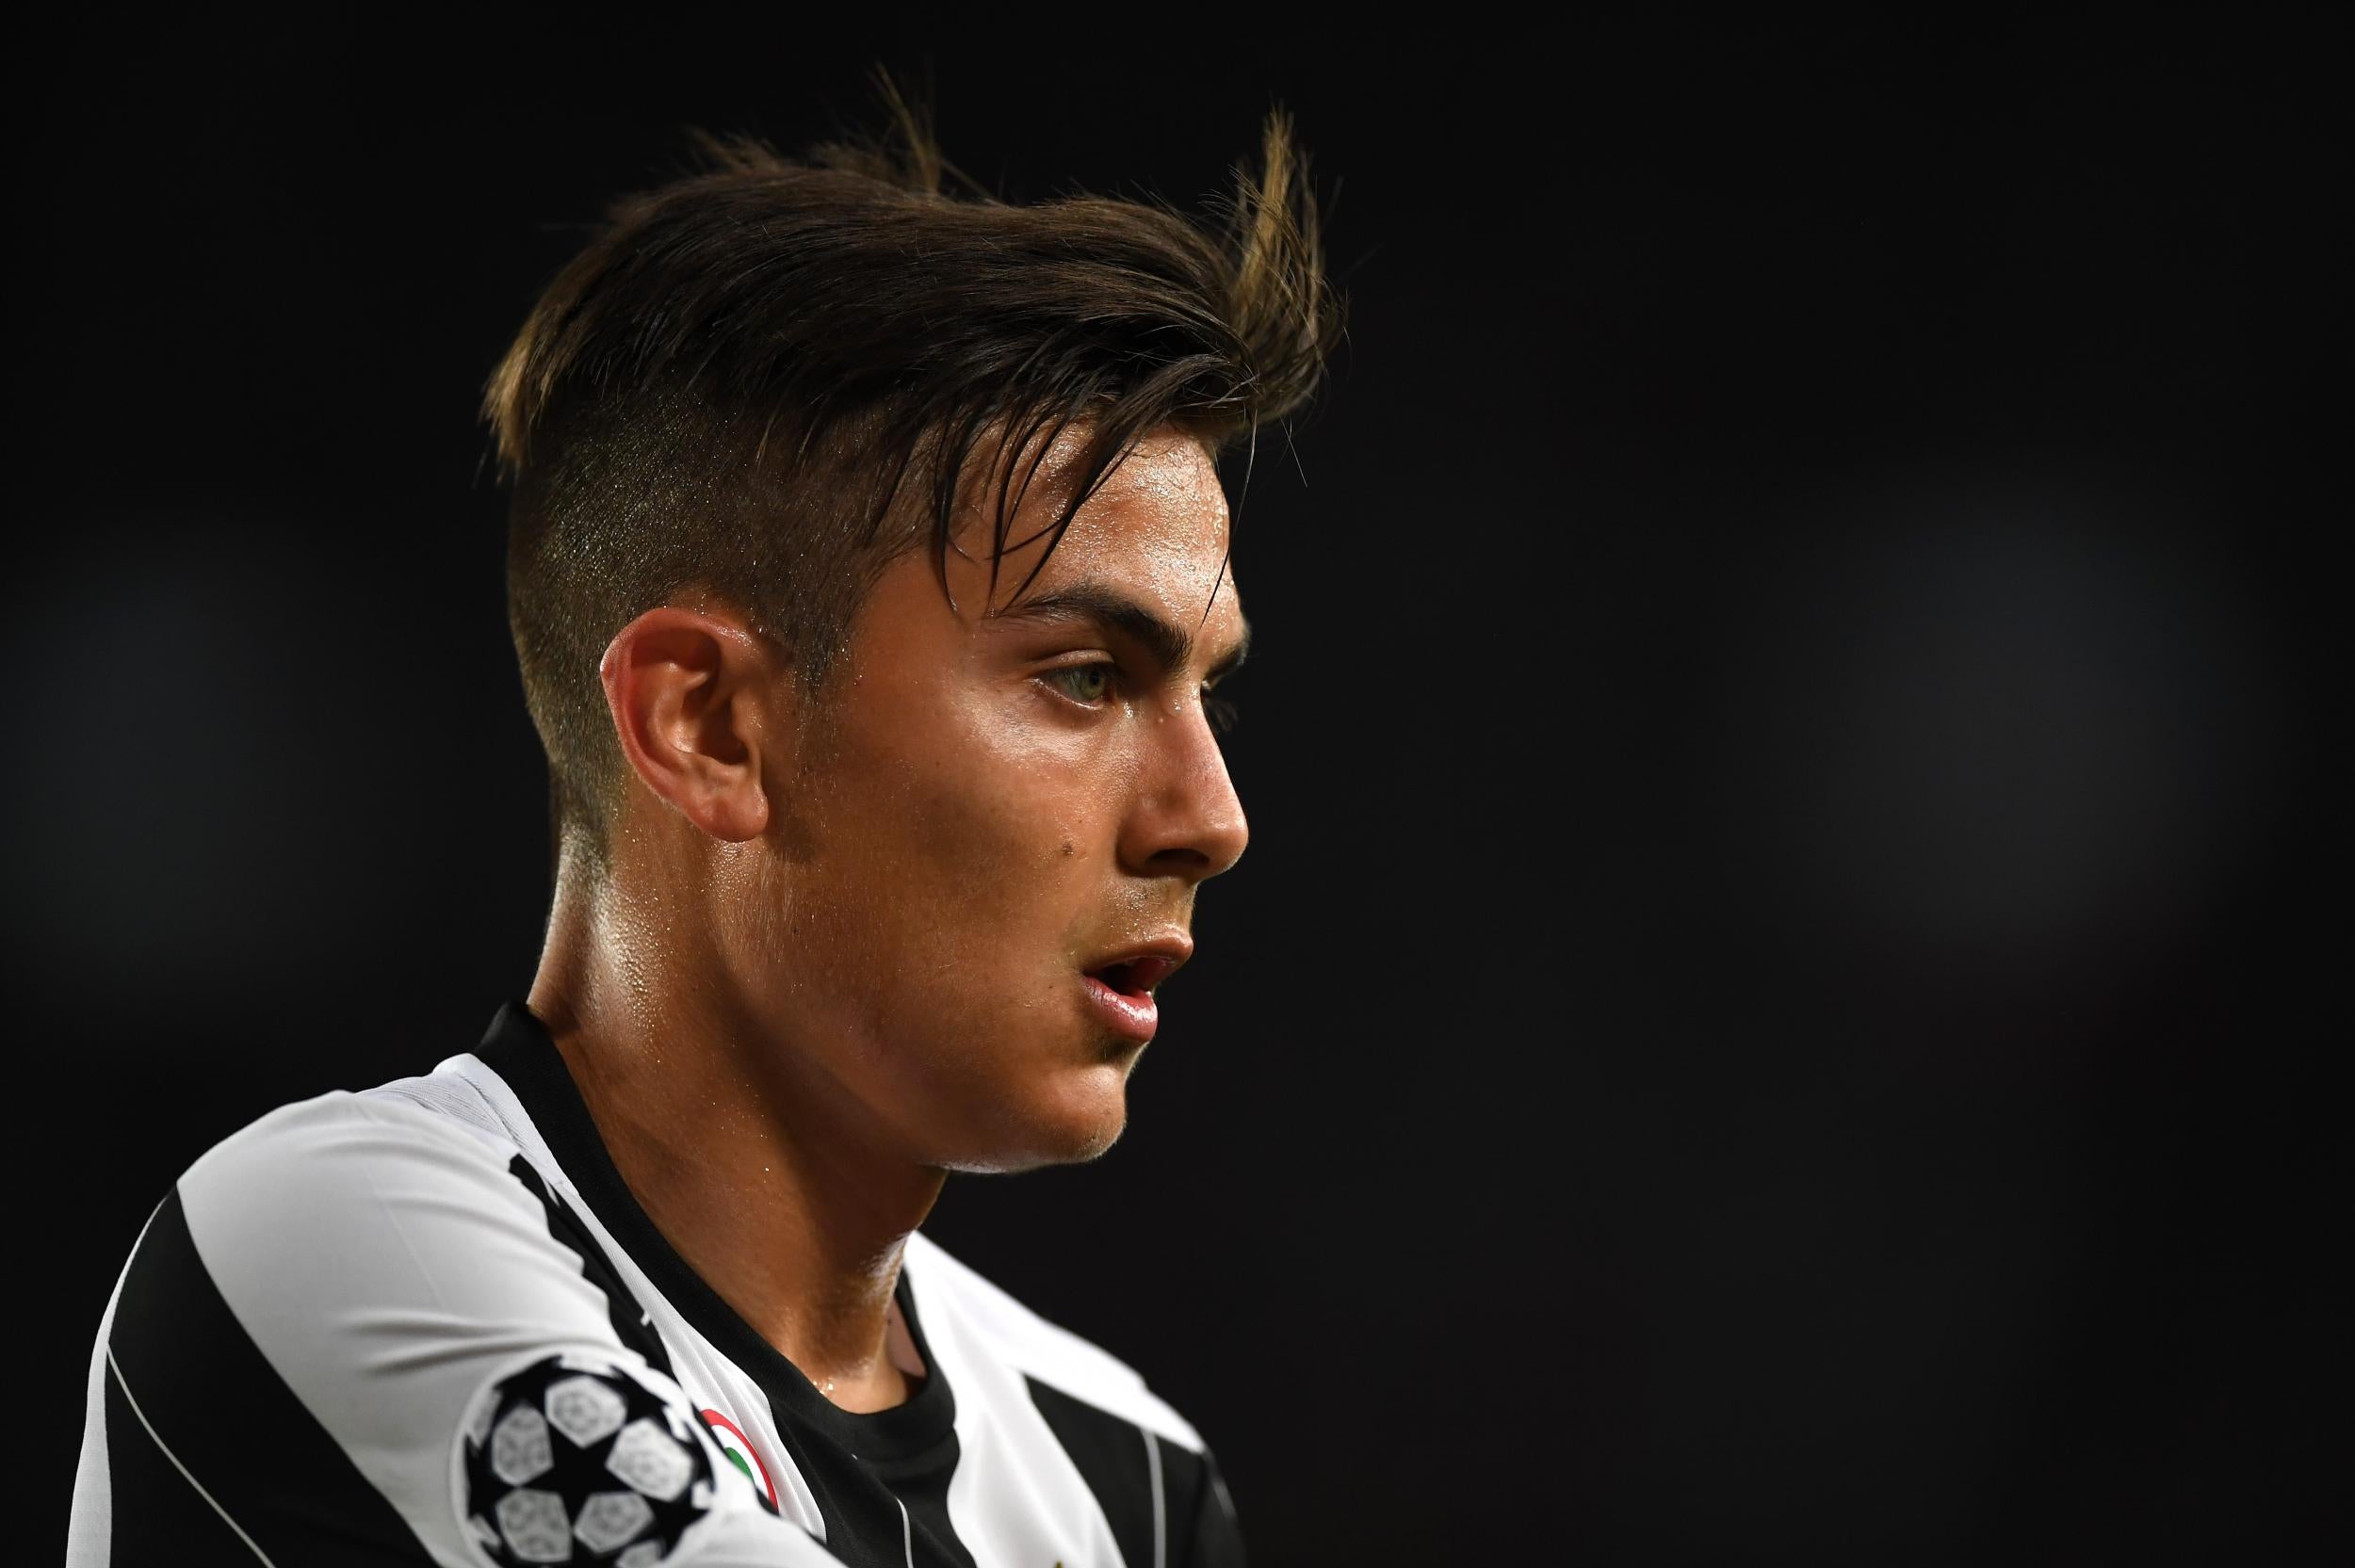 Paulo Dybala has scored four times in the Champions League this season